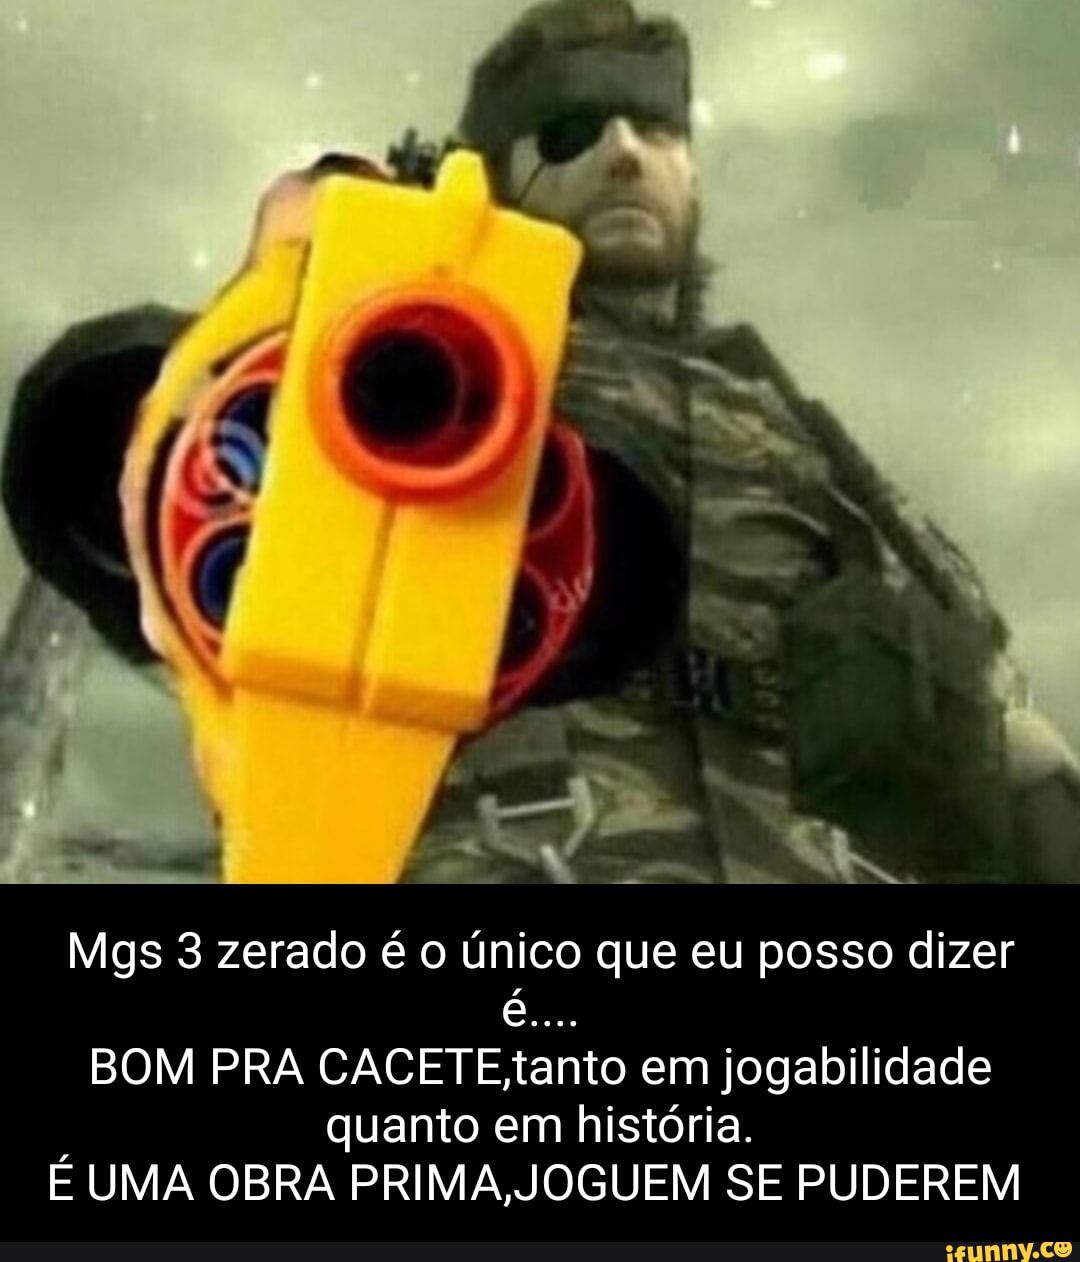 Picture memes ivIKeAwaA by Serpent_2319: 1 comment - iFunny Brazil